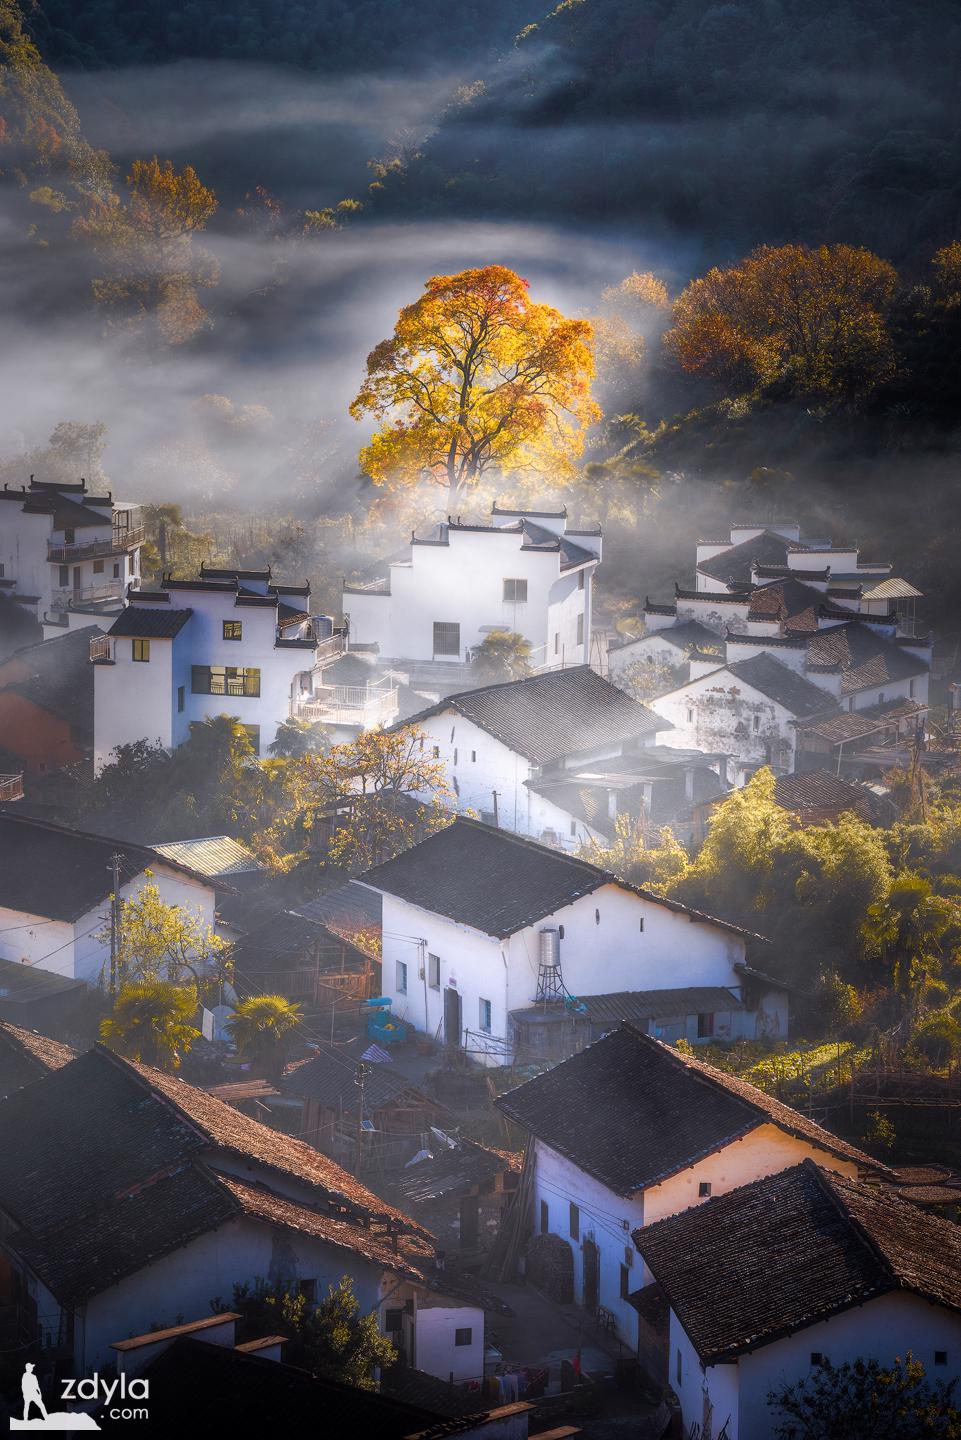 The most beautiful tree in Shicheng Village